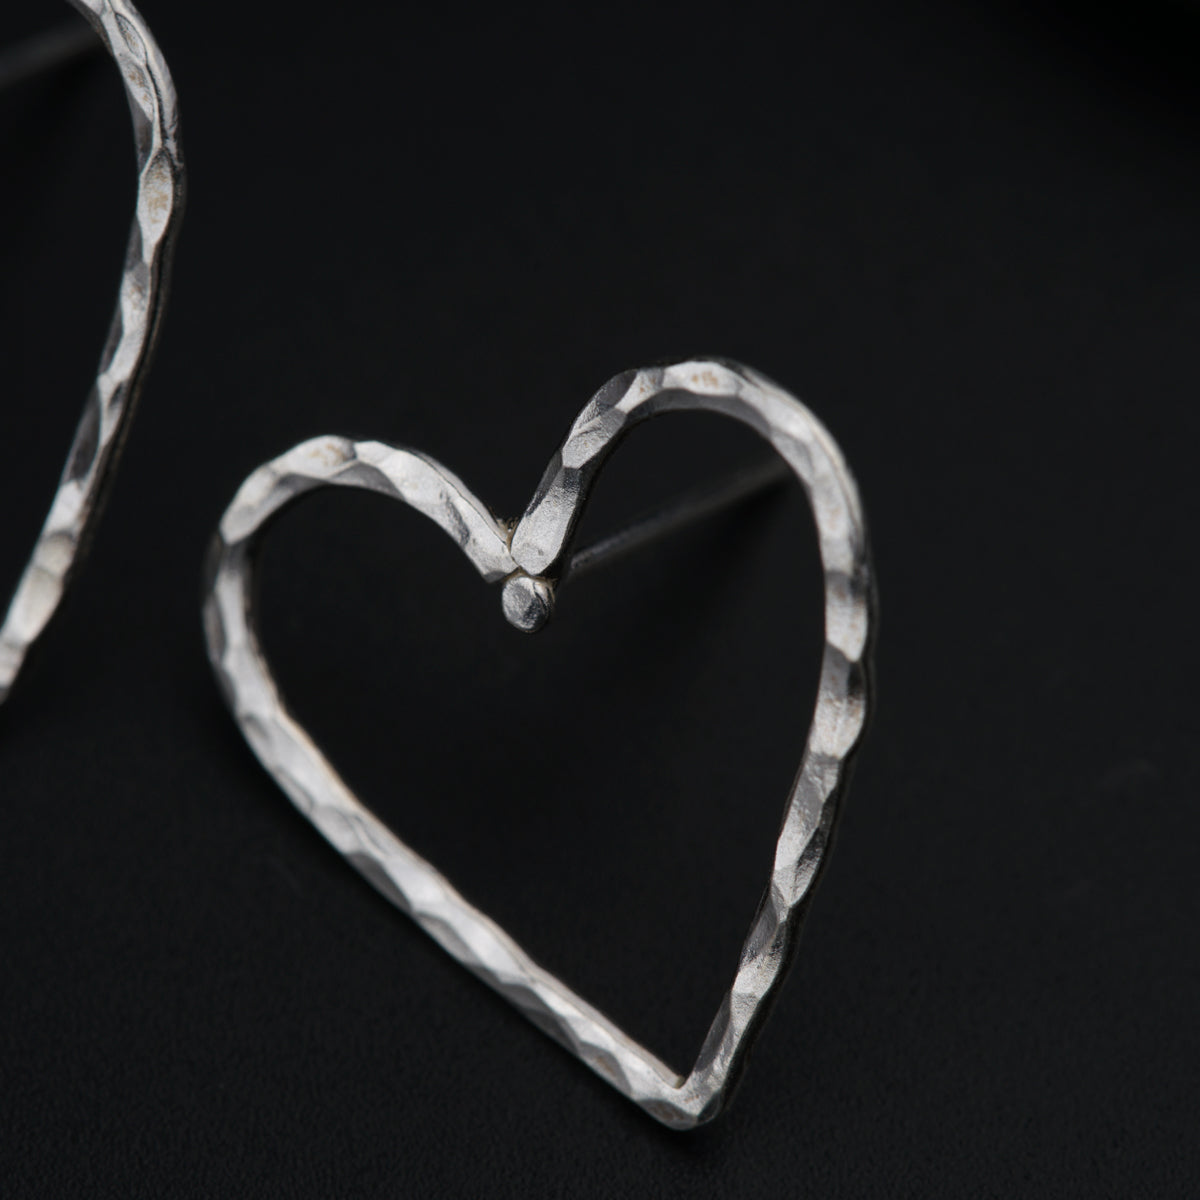 a pair of silver heart earrings on a black background